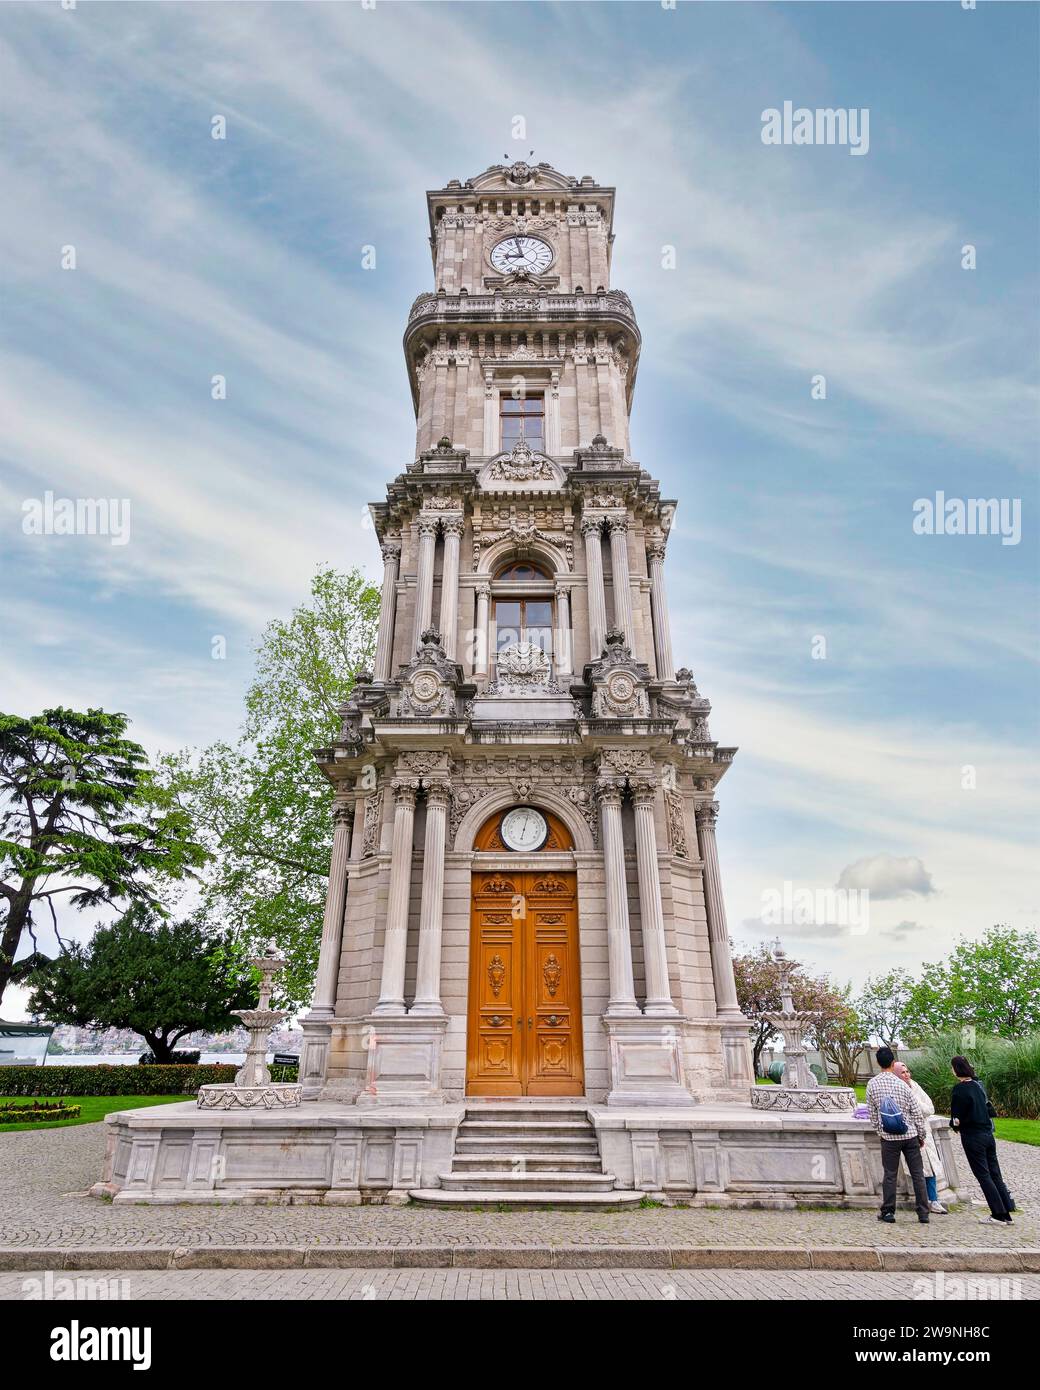 Istanbul, Turchia - 10 maggio 2023: Torre dell'Orologio Dolmabahce, turco: Dolmabahce Saat Kulesi, situata all'esterno del Palazzo Dolmabahce Foto Stock